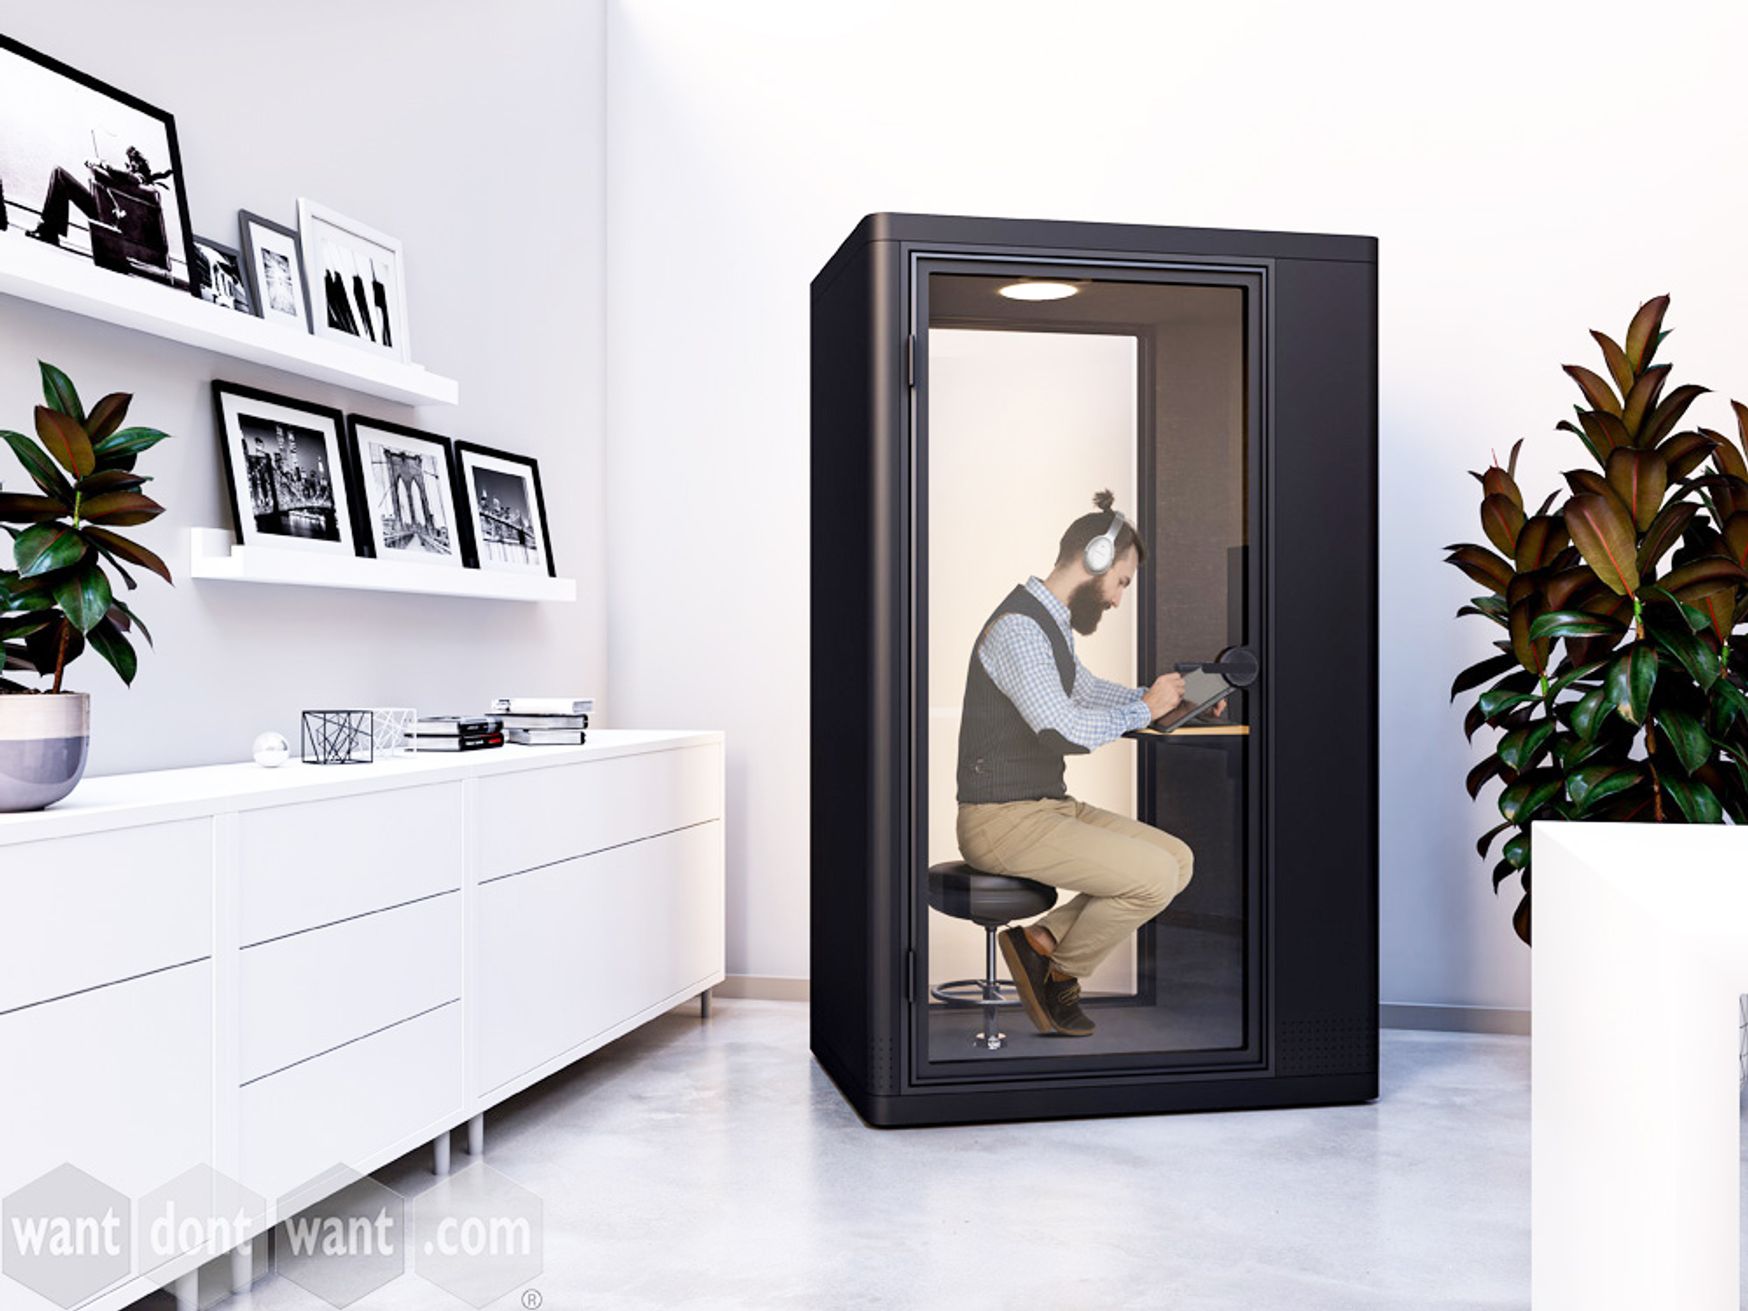 <b>IN STOCK NOW!</b> Brand new excellent design Zoom/Phone booths. Quick delivery - call us!